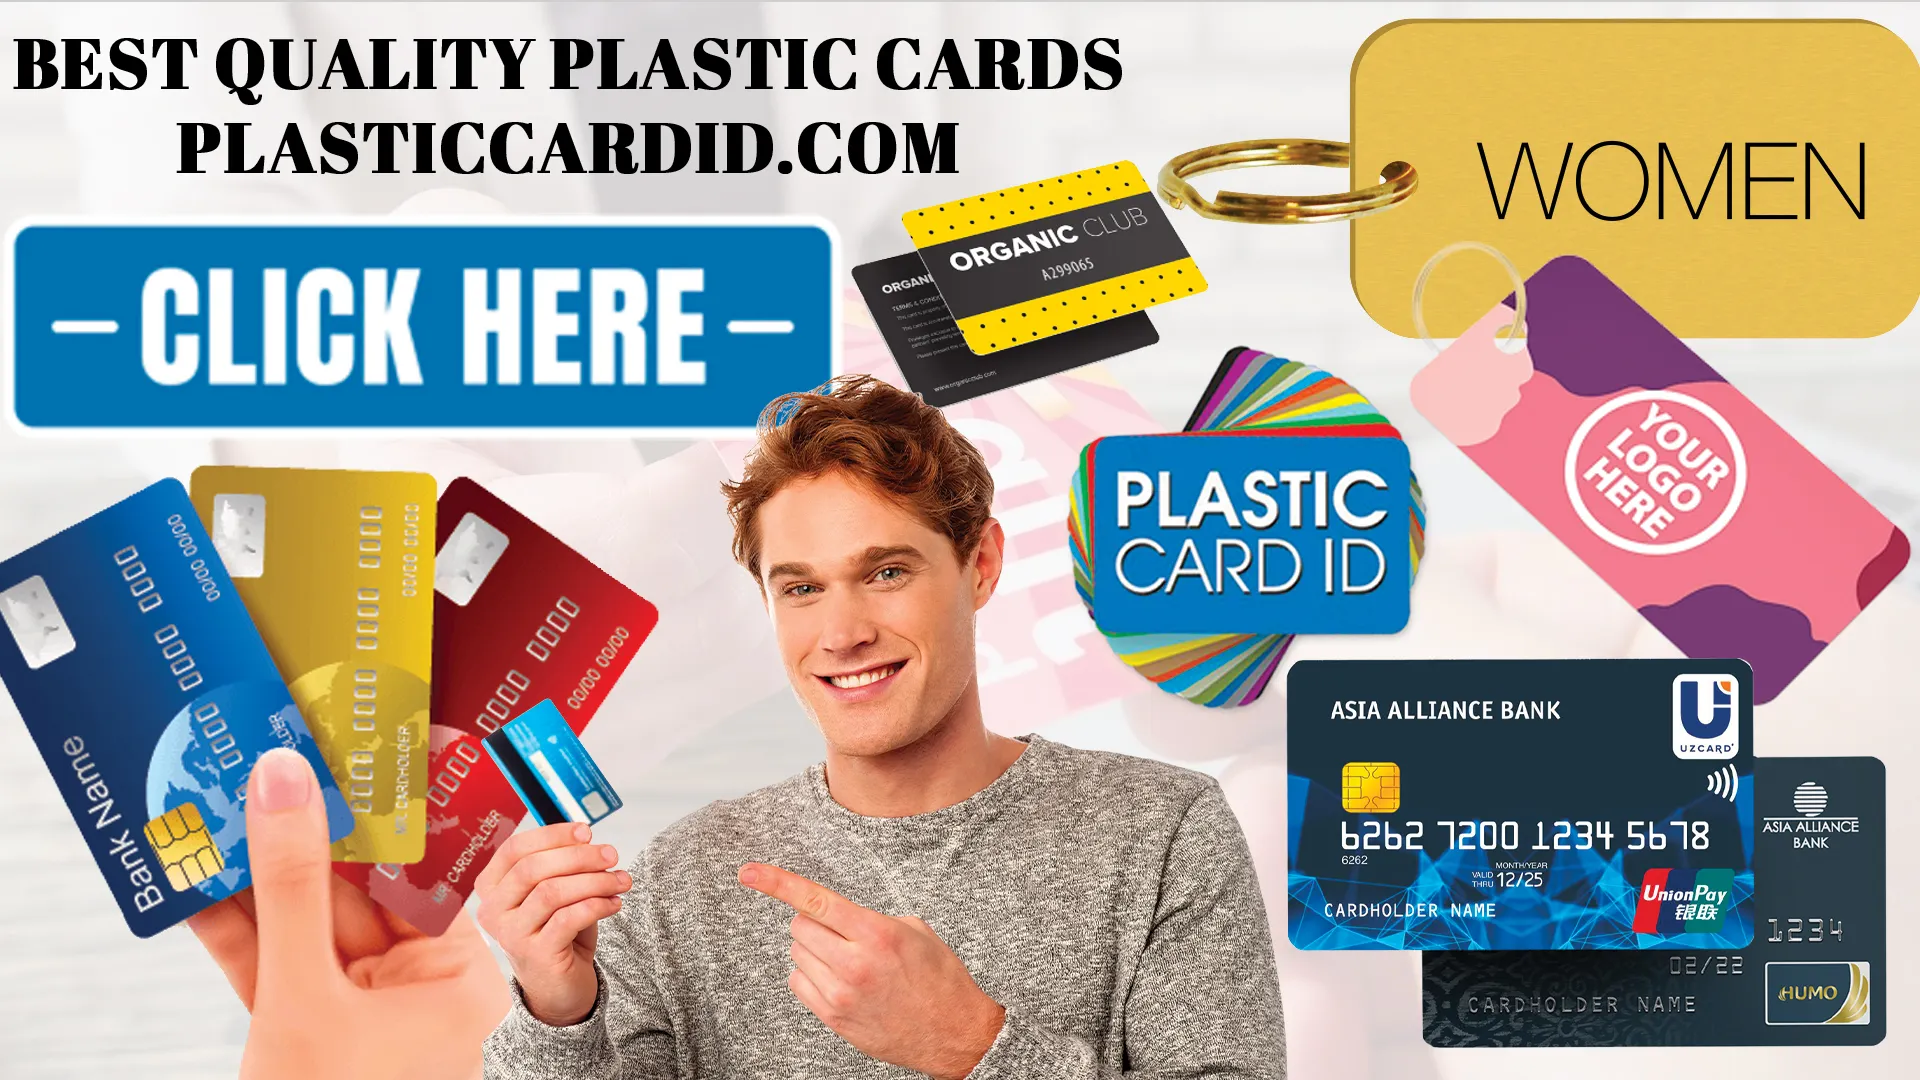 Welcome to the World of Superior Card Quality with Plastic Card ID




